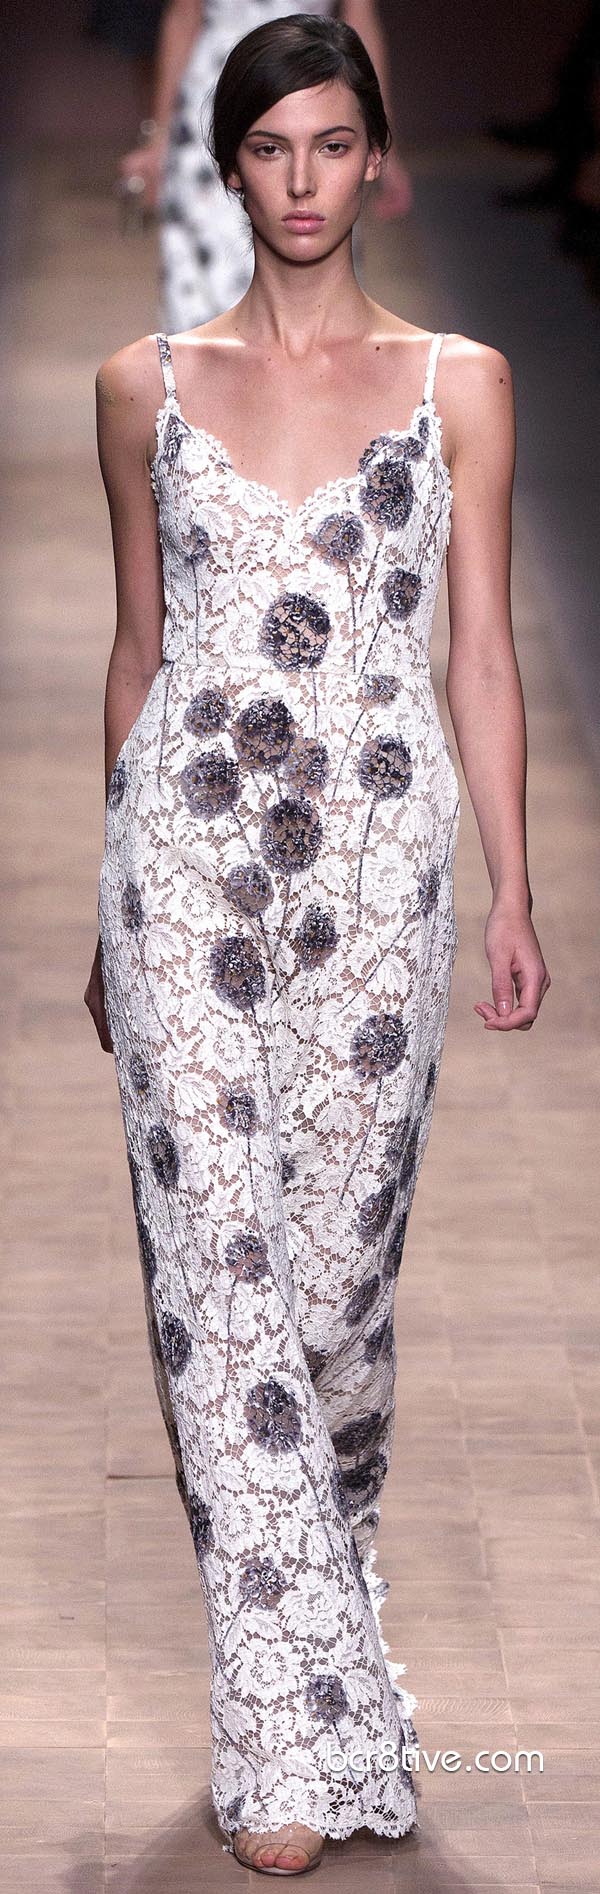 Valentino Spring Summer 2013 Ready To Wear Collection - Evening Gown